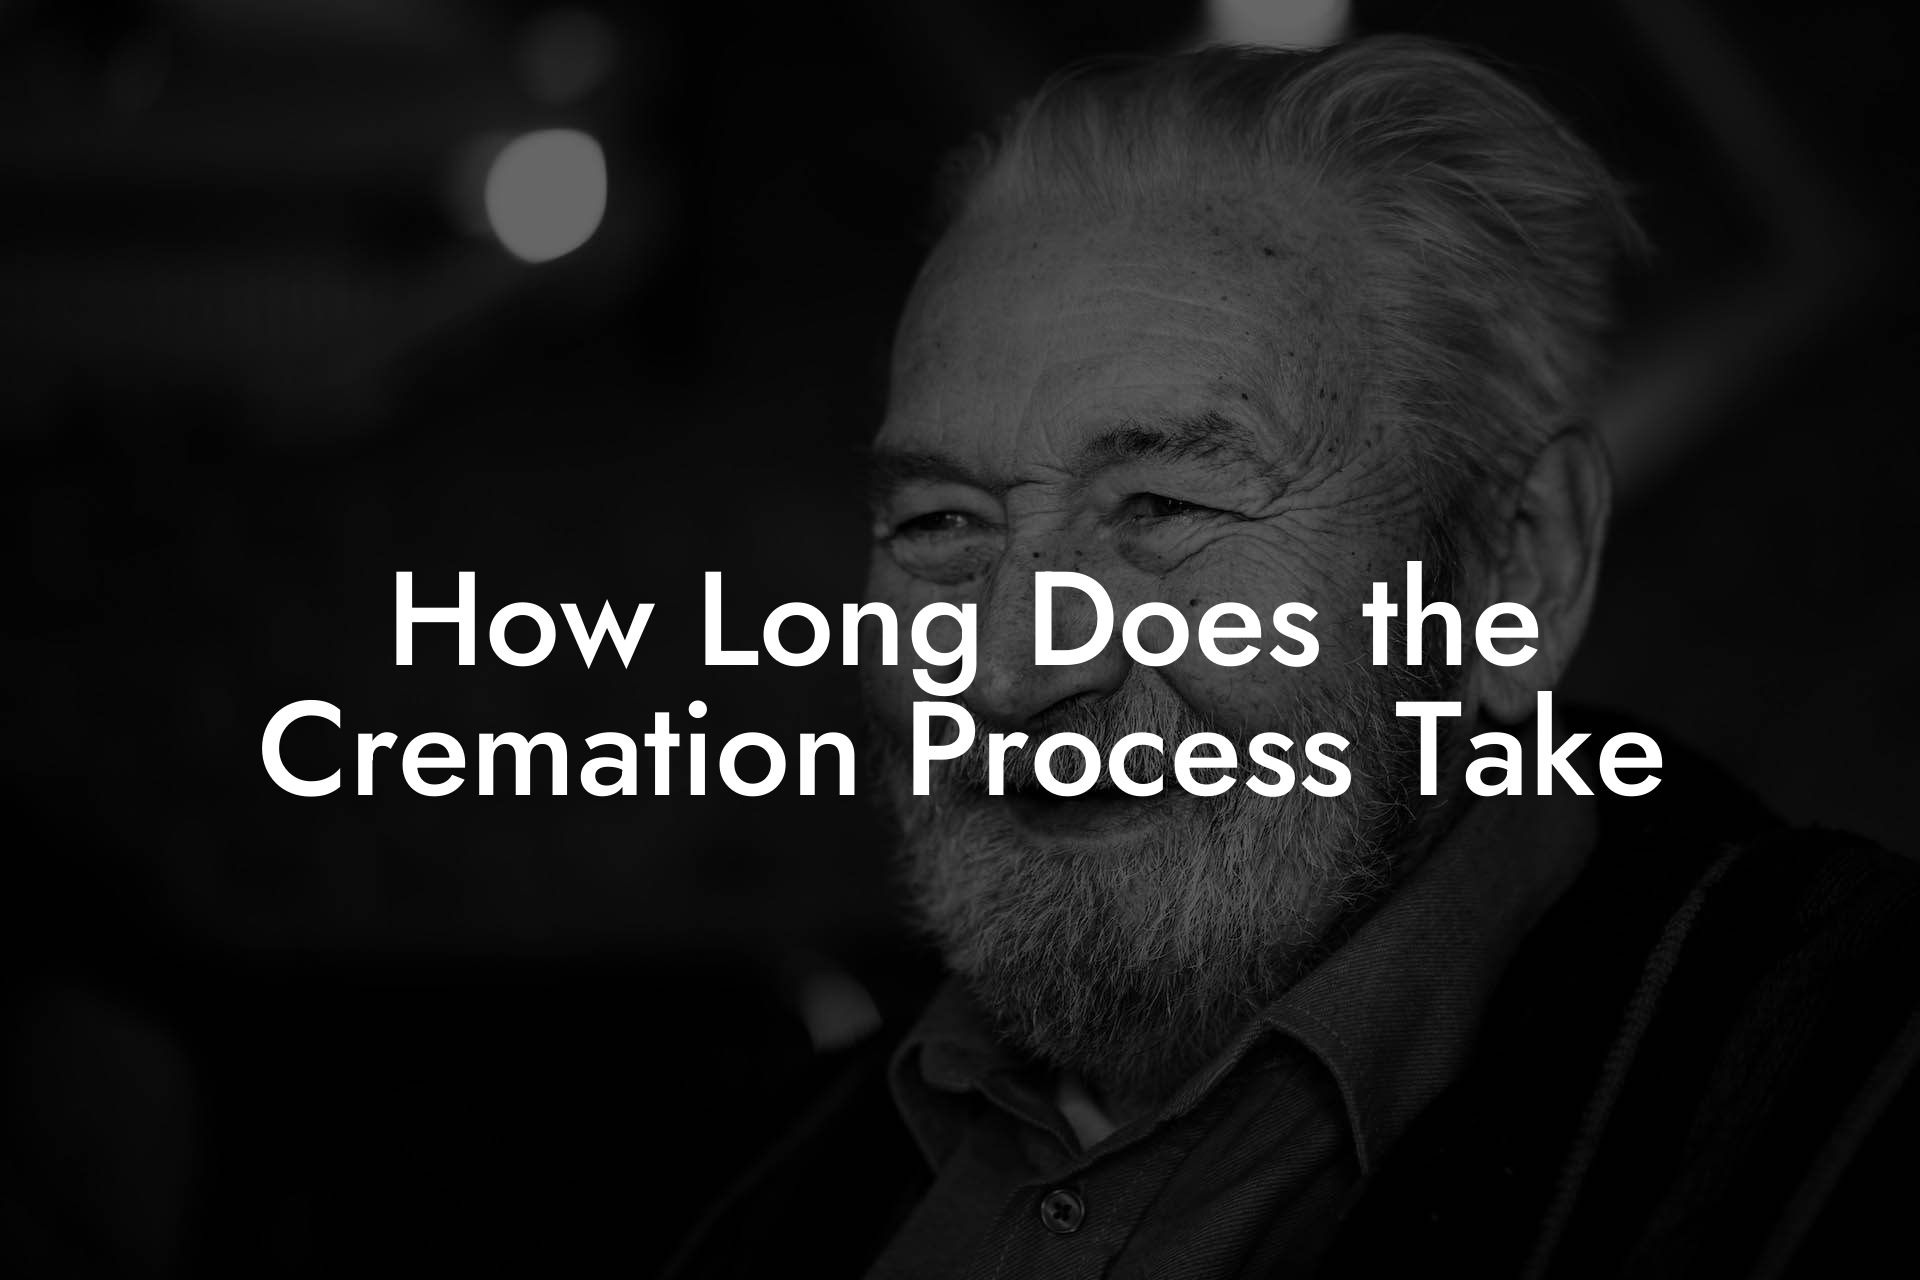 How Long Does the Cremation Process Take